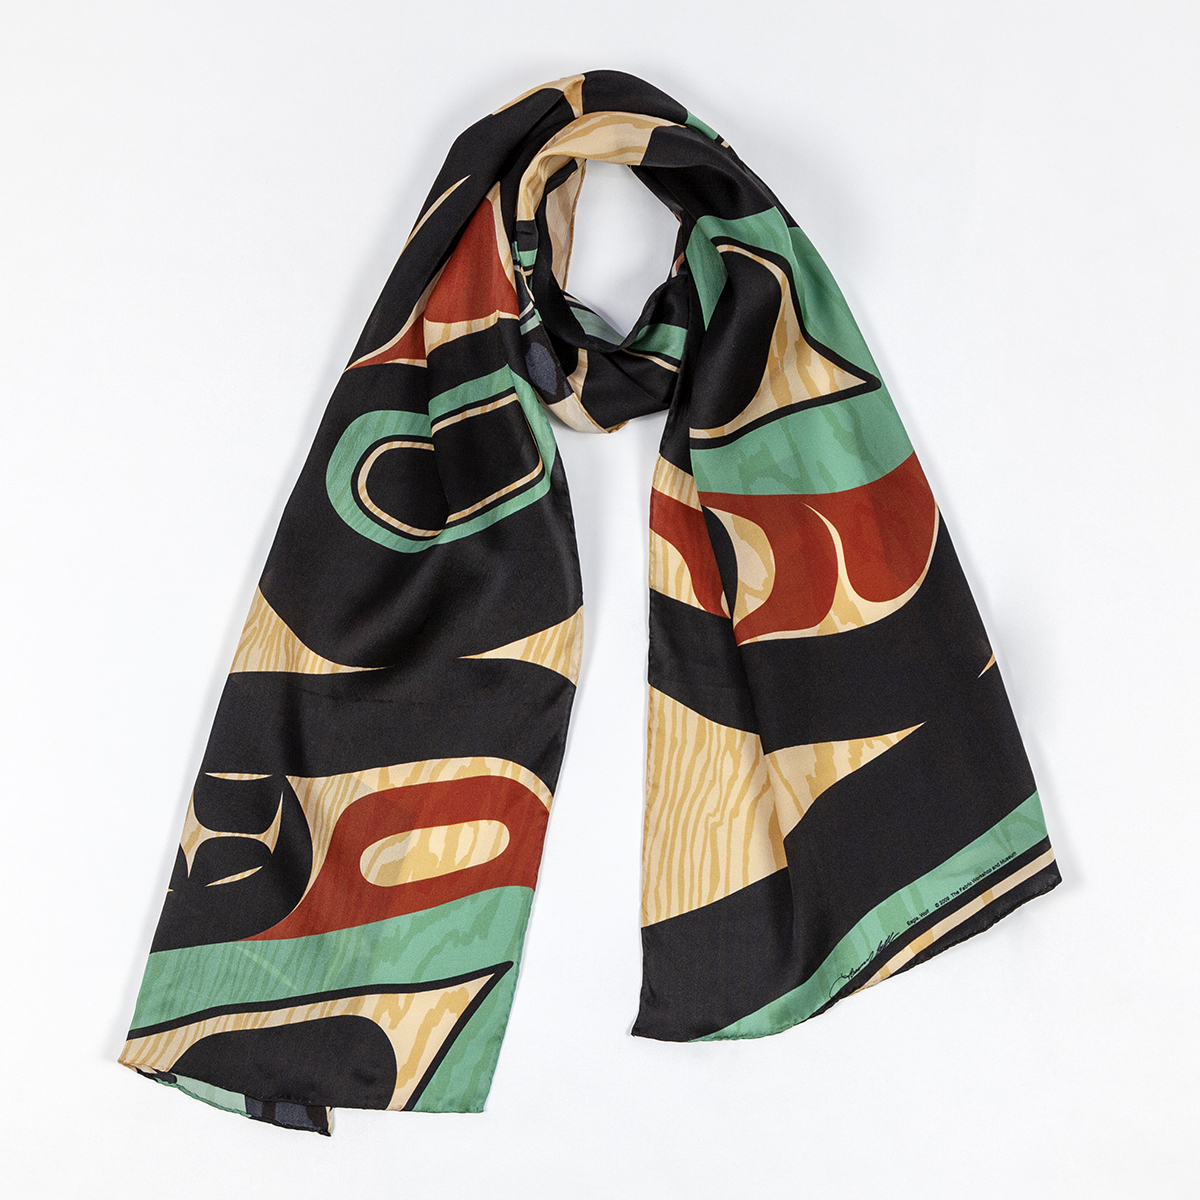 A silk scarf wrapped in a ring shape in the middle to allow room for someone's neck. The scarf is made up of red, teal, and black shapes over a woodgrain colored ground.